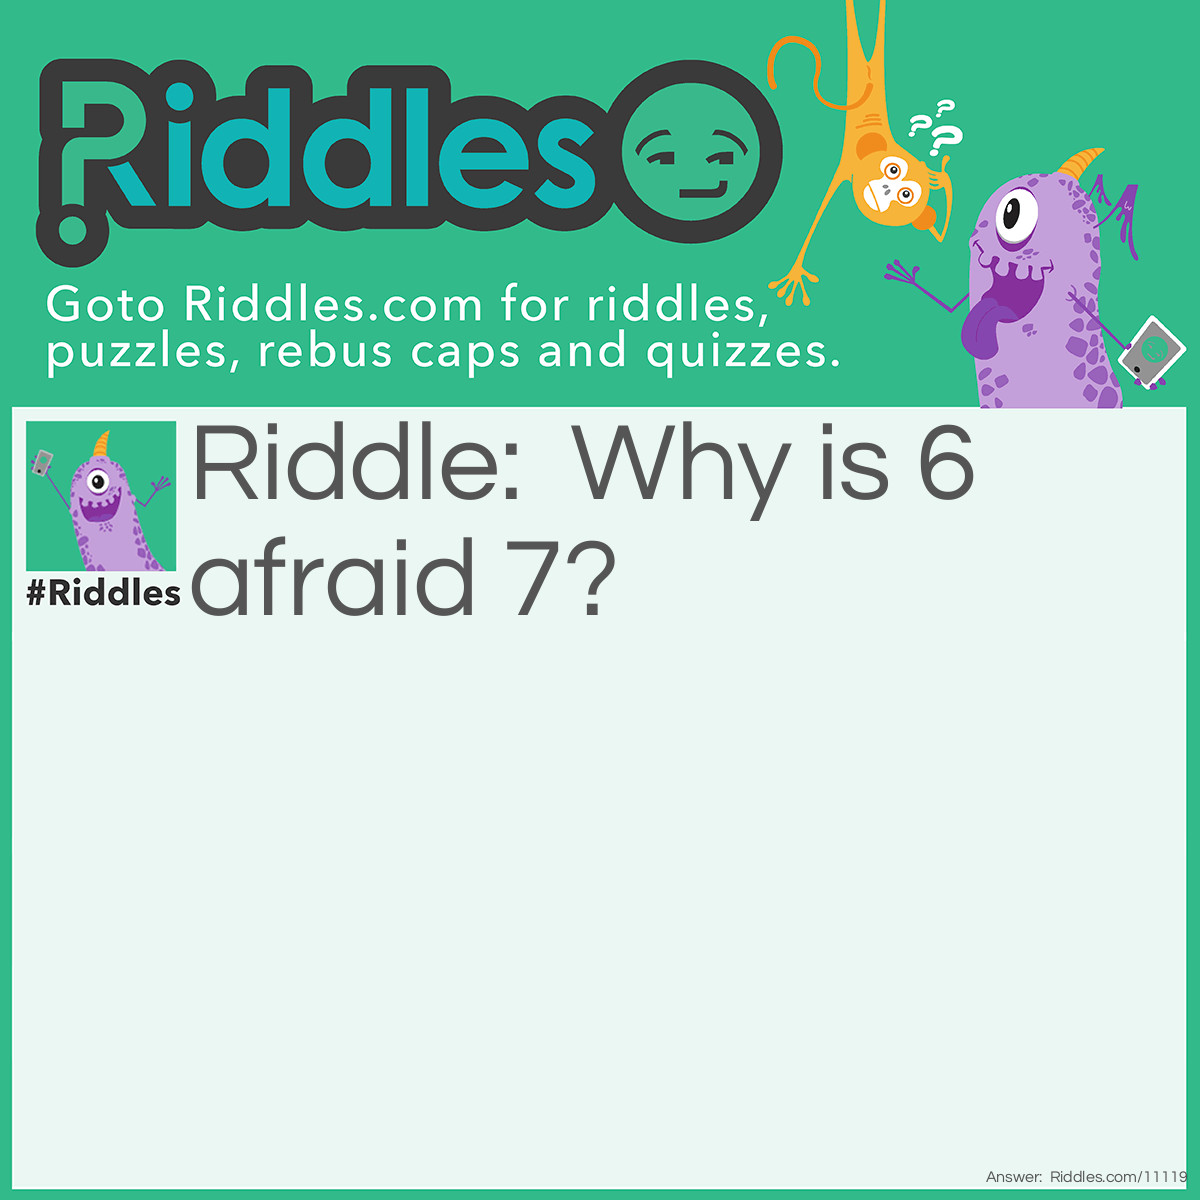 Riddle: Why is 6 afraid 7? Answer: Because 7,8,9 - because 7 ate 9.